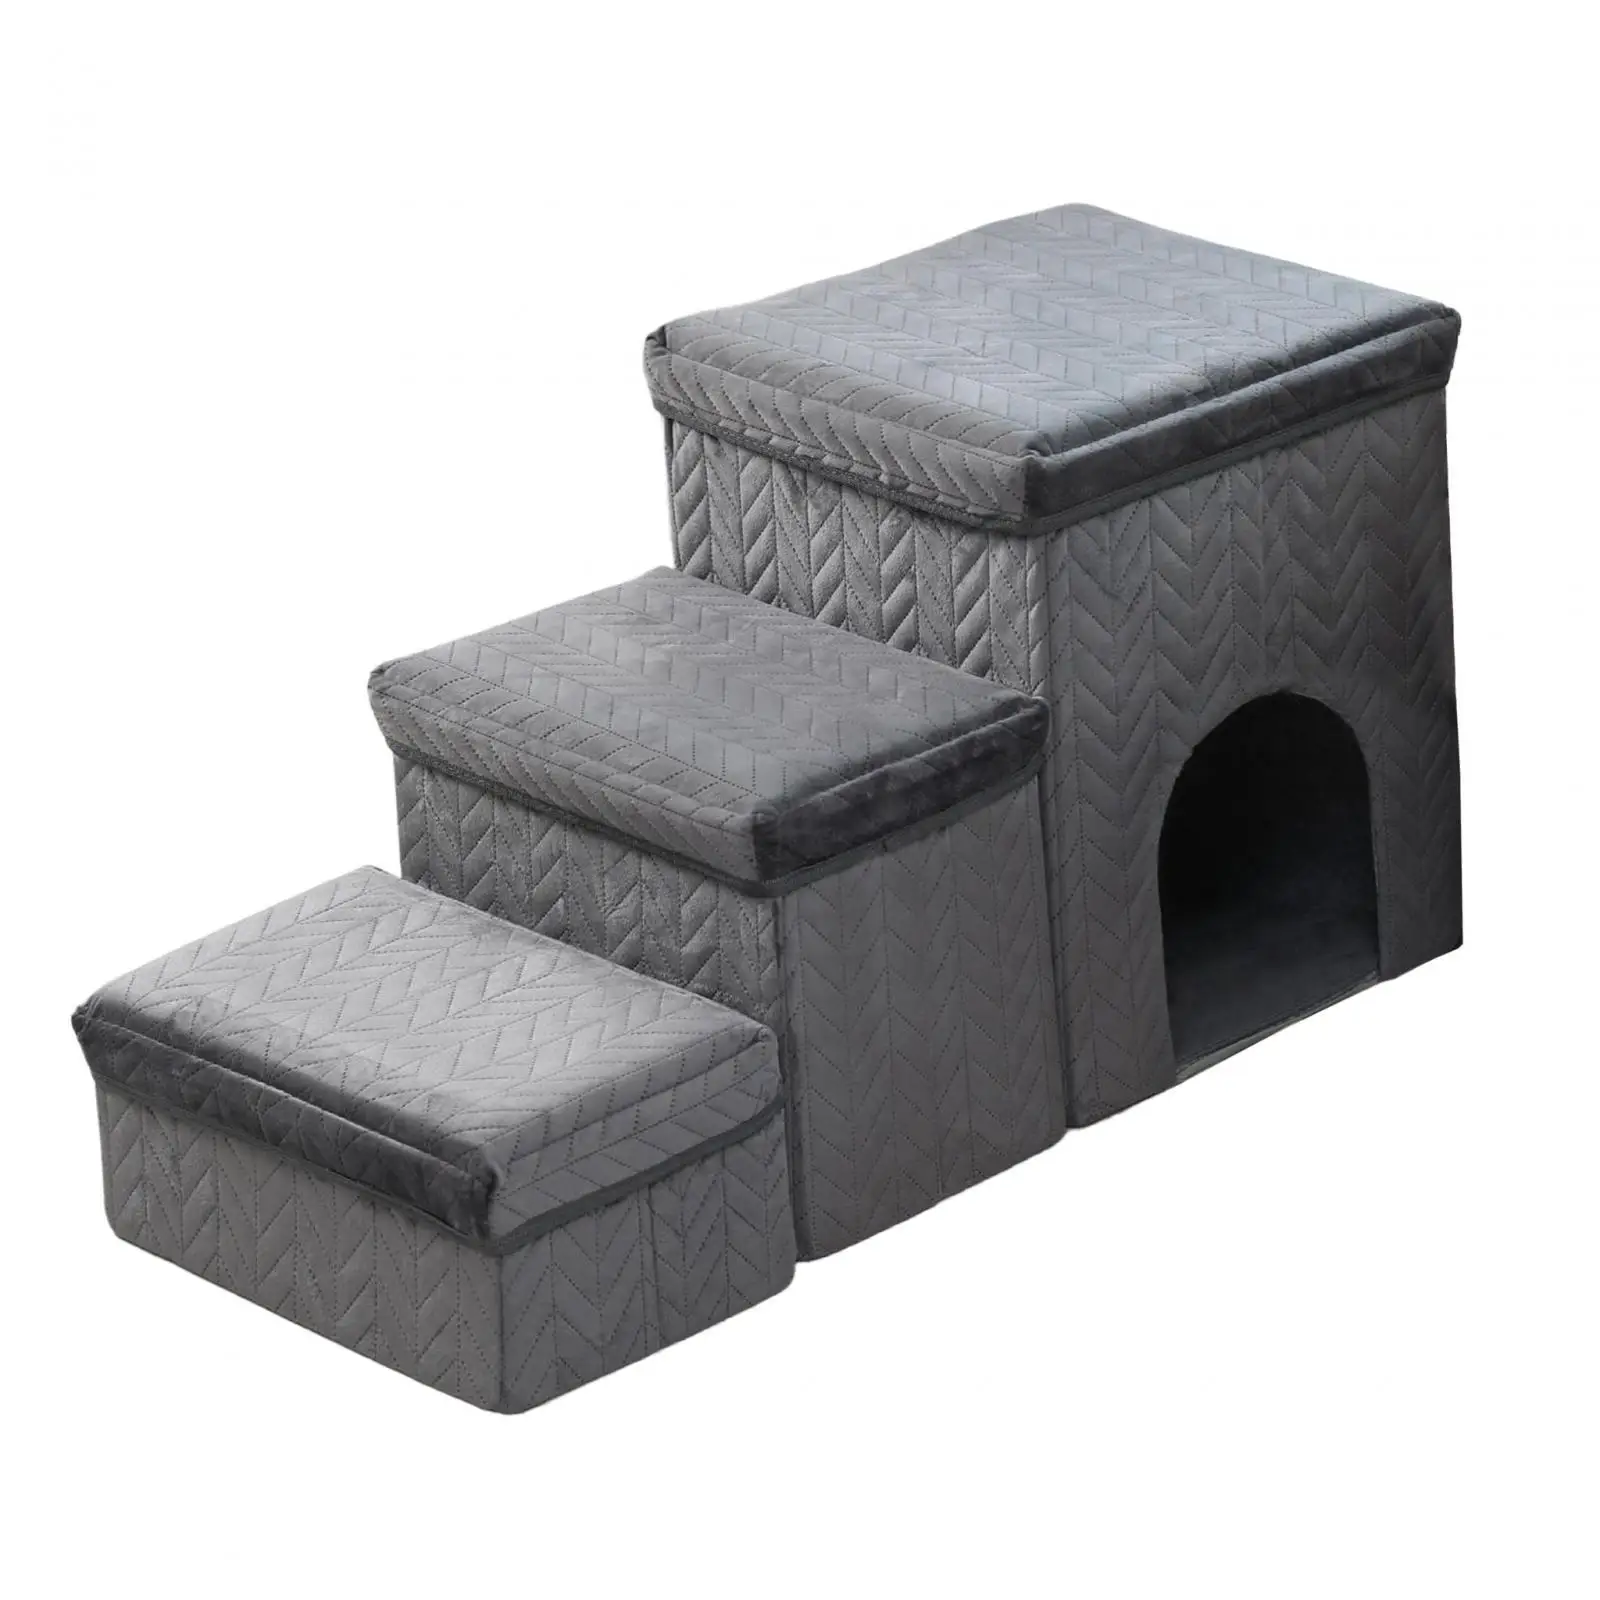 Foldable Pet Stairs Sofa Bed Storage Box Non Slip Slope Indoor Portable Durable Cat Ramp Ladder Dog Stairs Ladder 3 Step Support